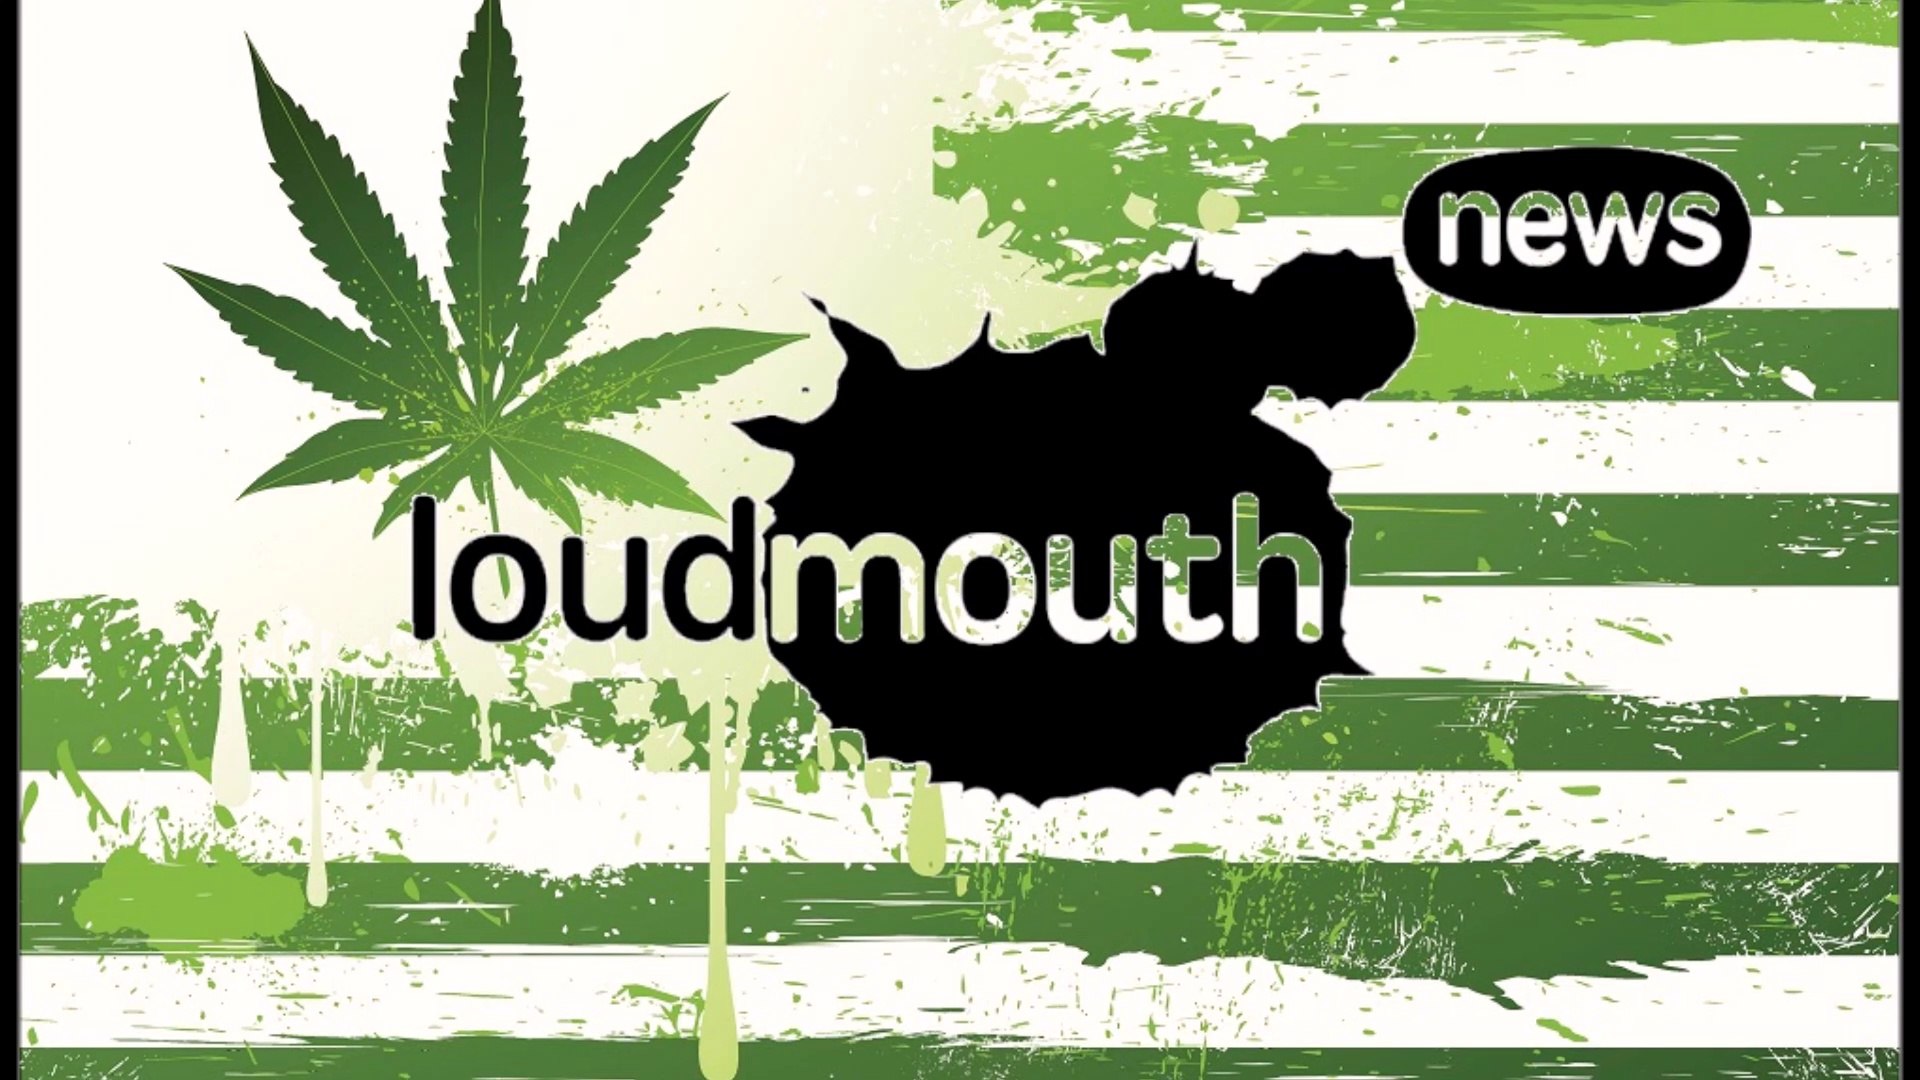 Loudmouth News - Around The USA in 420 Minutes